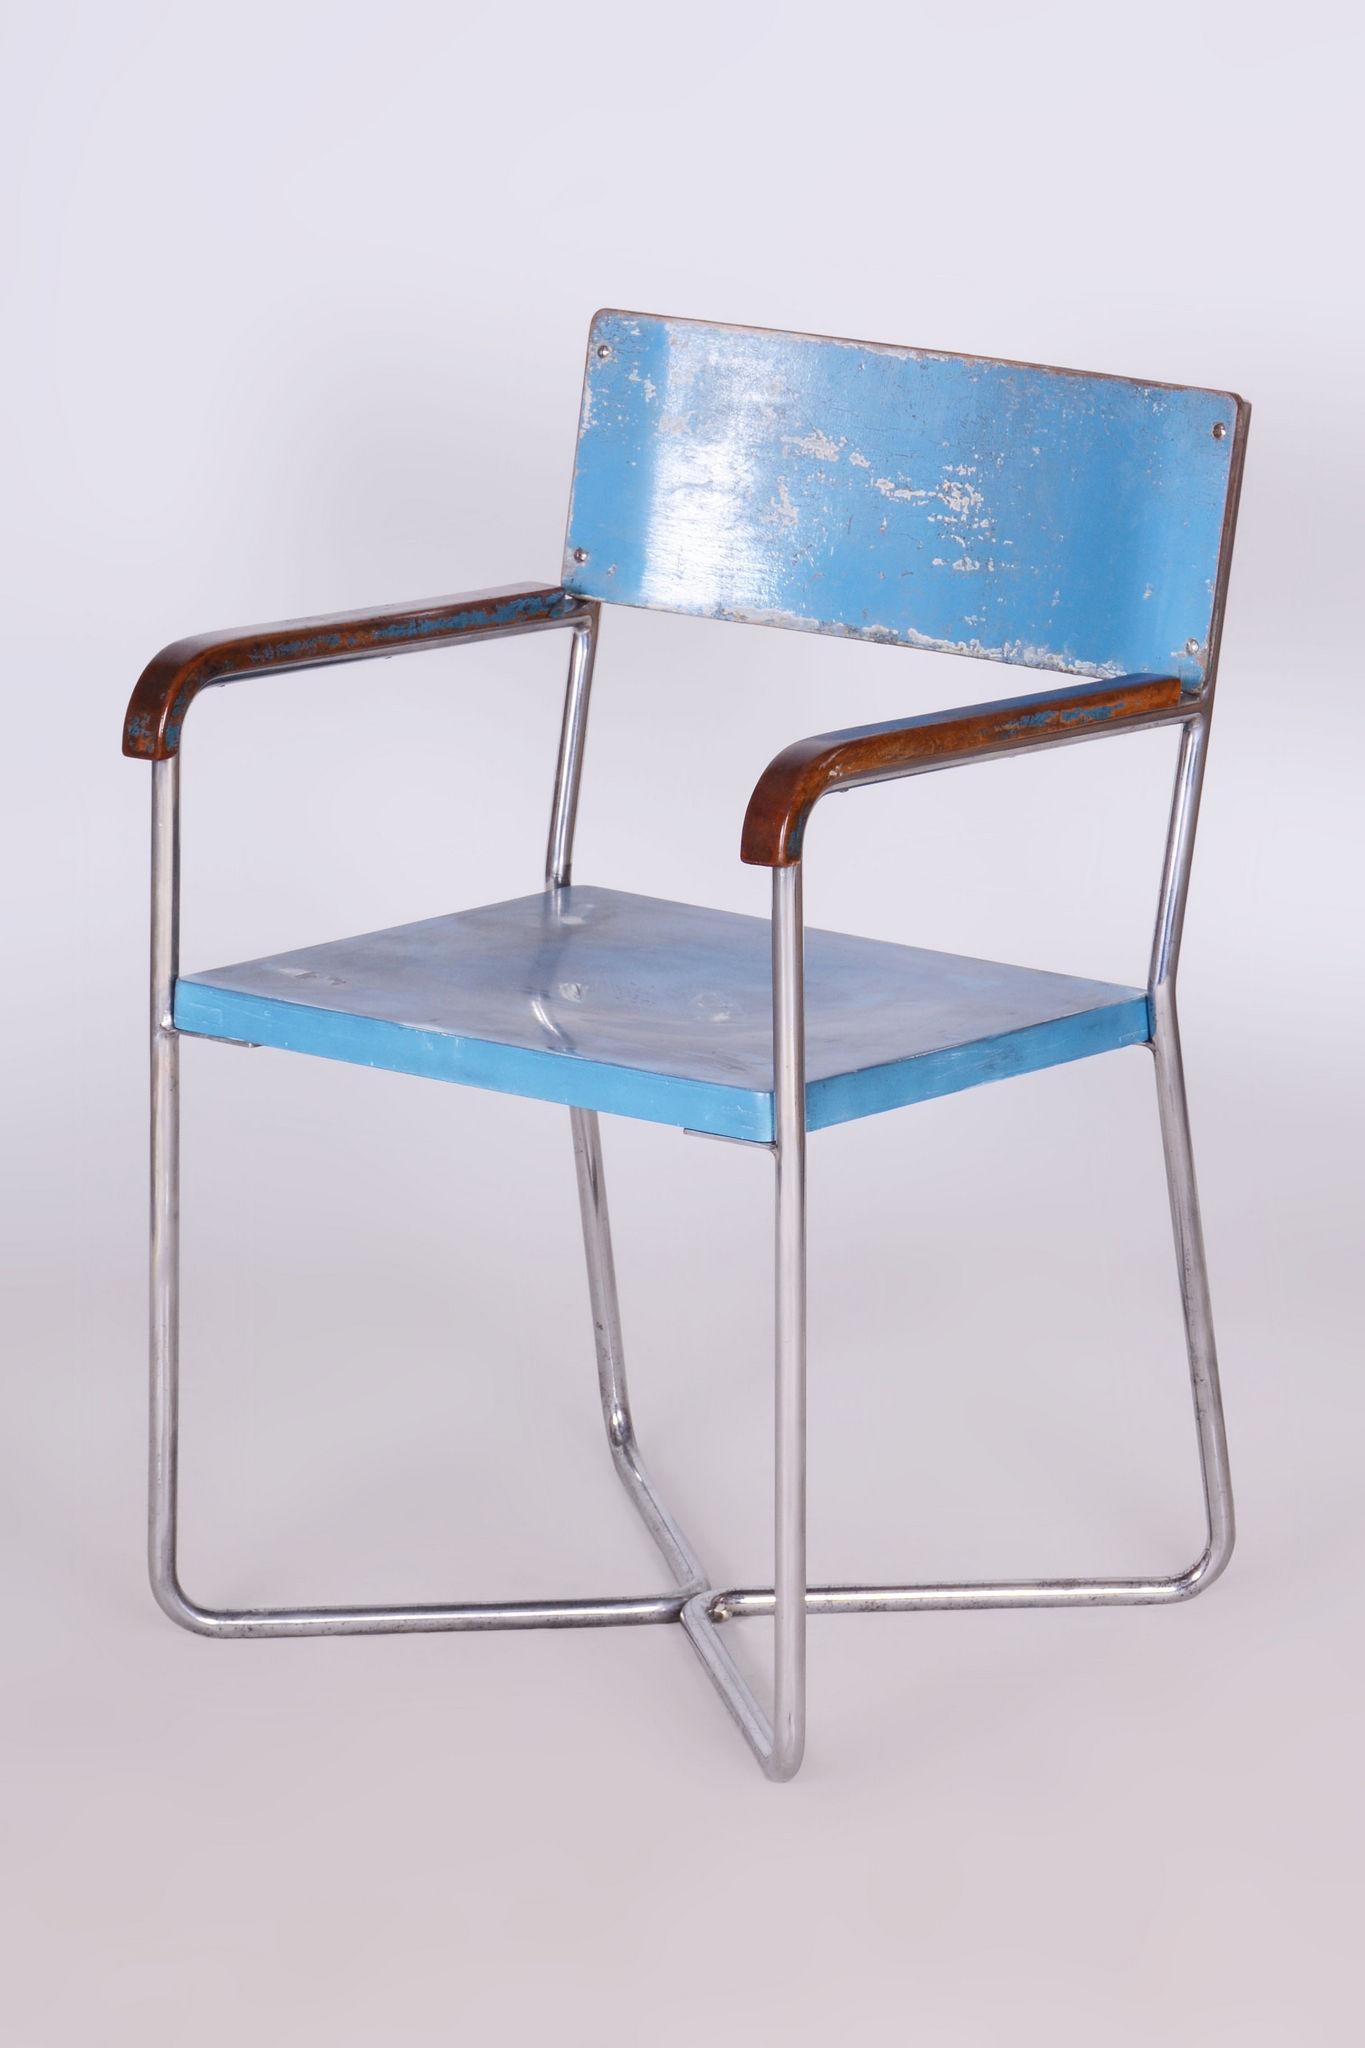 Made by Mücke Melder, an influential modernist furniture manufacturer specializing in tubular steel designs. 

In pristine original condition, the item has been professionally cleaned, and its polish has been revived by our refurbishing team in